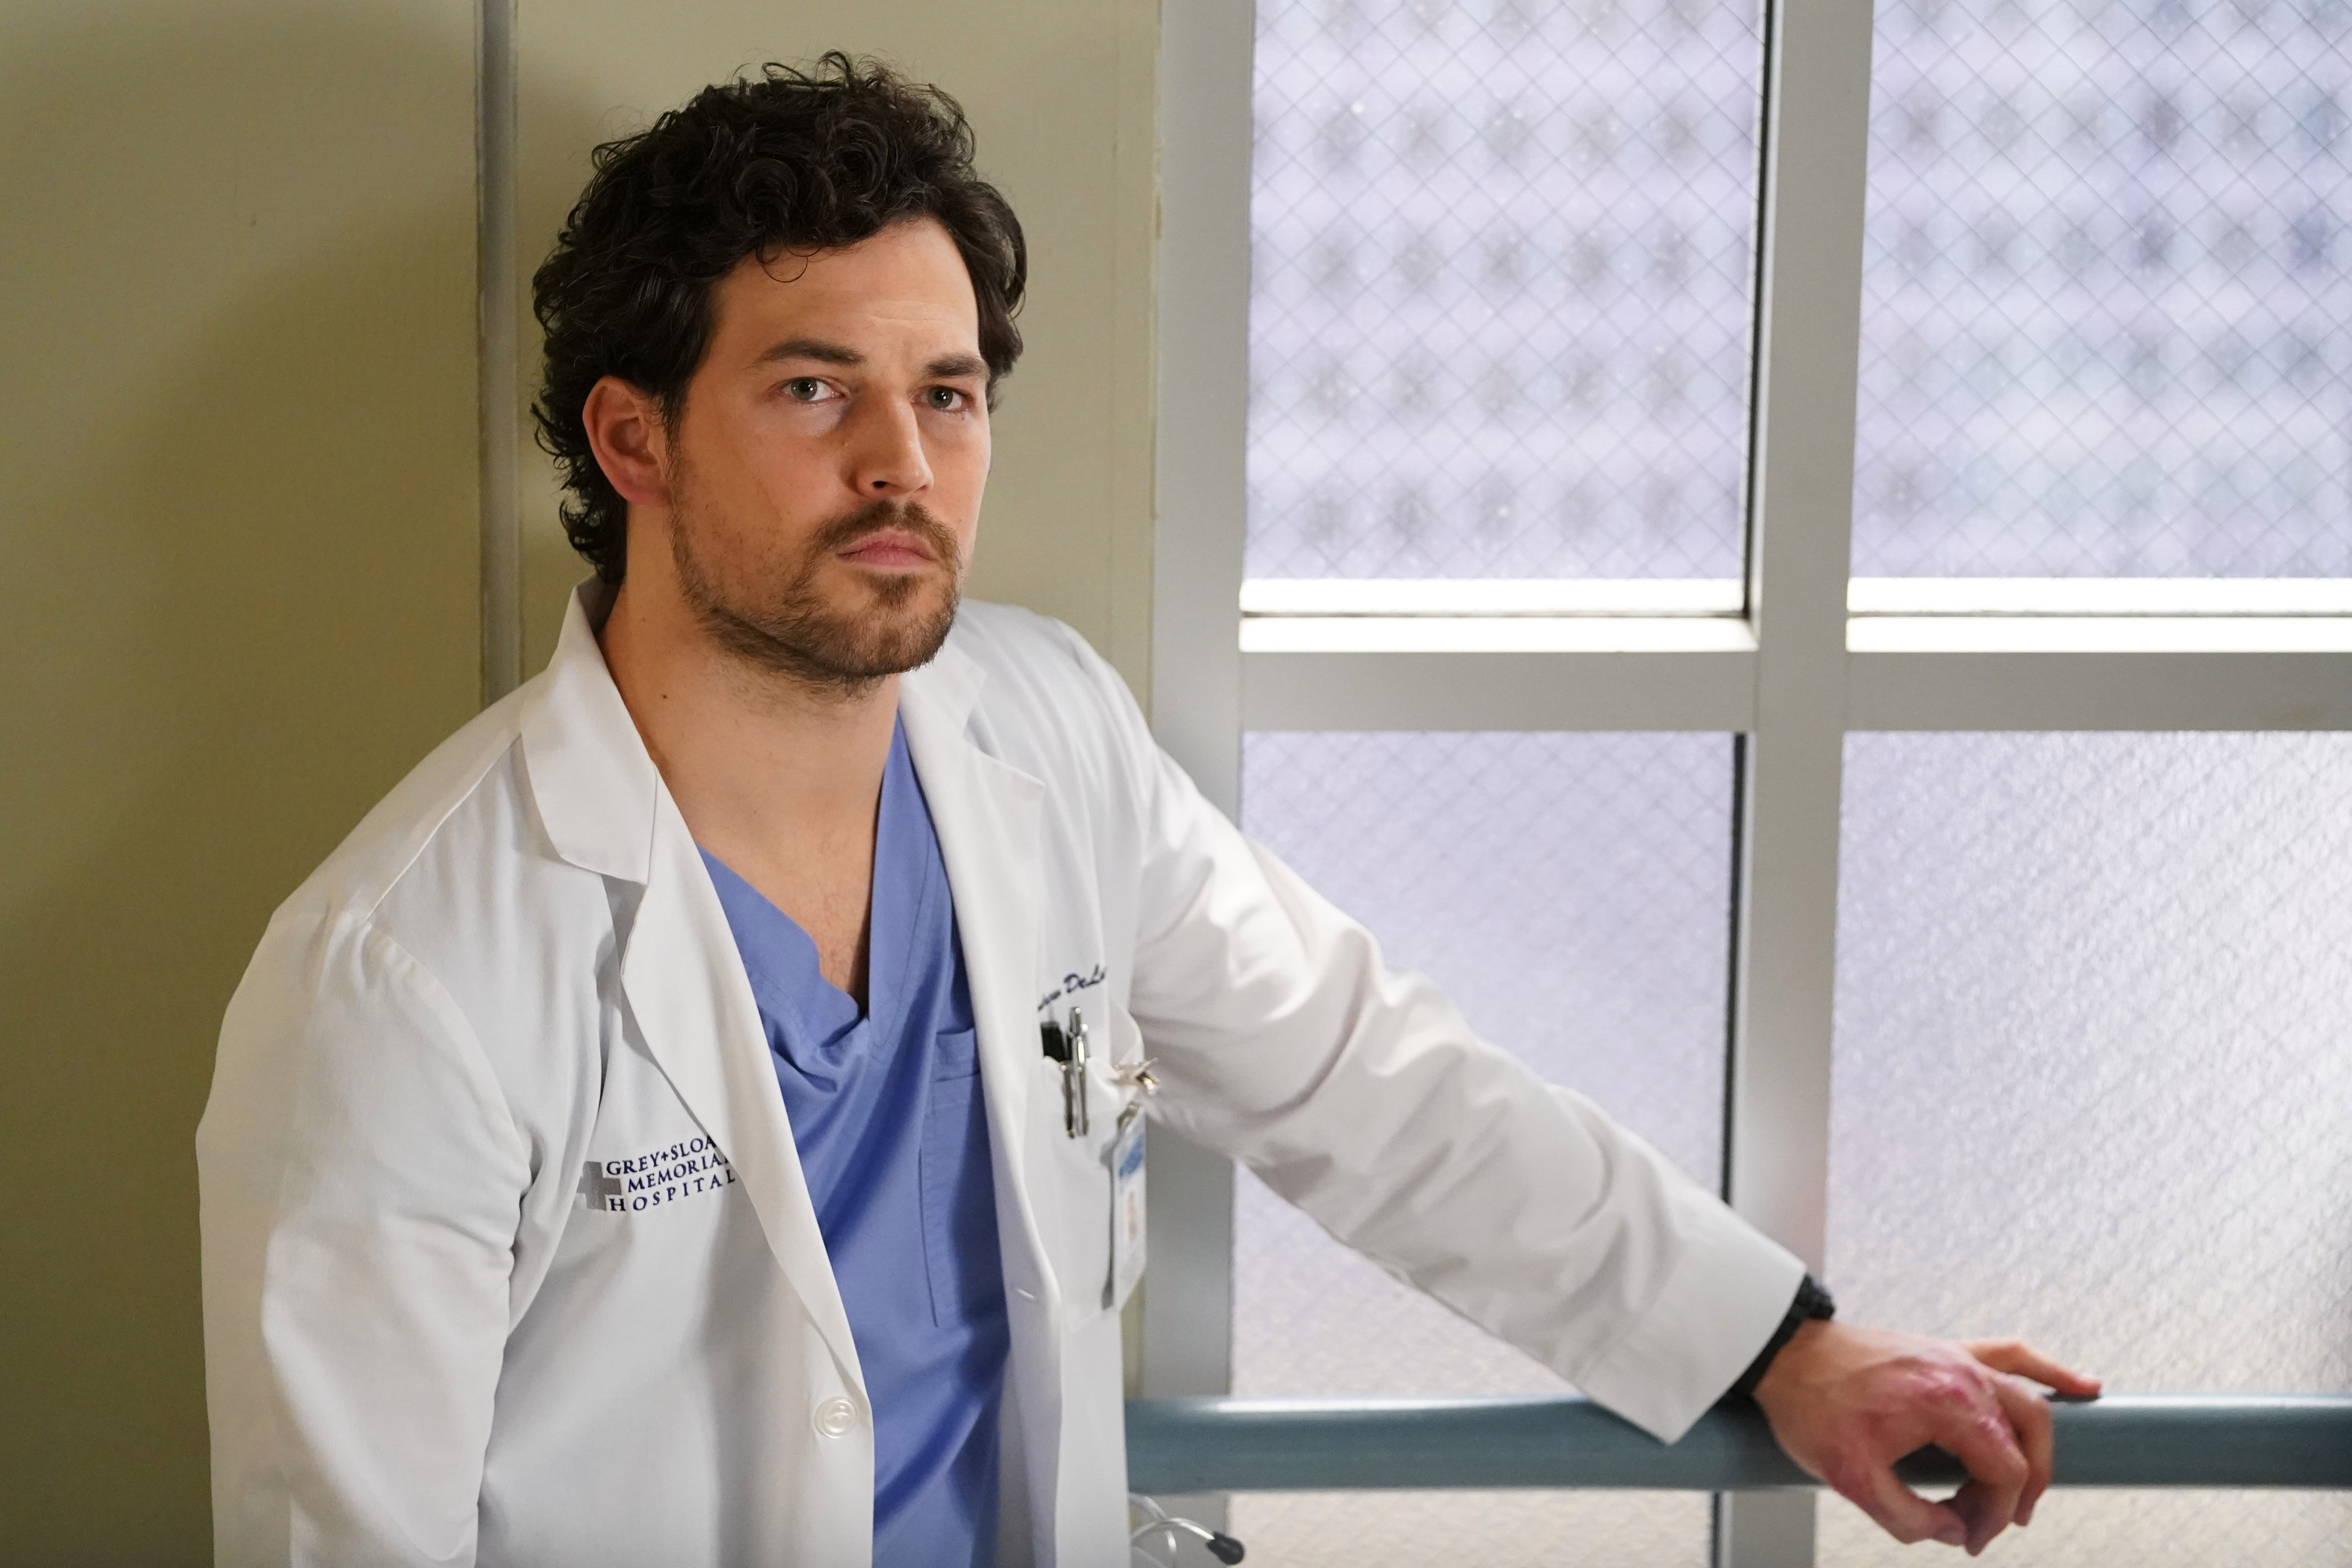 Grey’s Anatomy’s Giacomo Gianniotti to make directorial debut in season 17: ‘Living out my dreams’